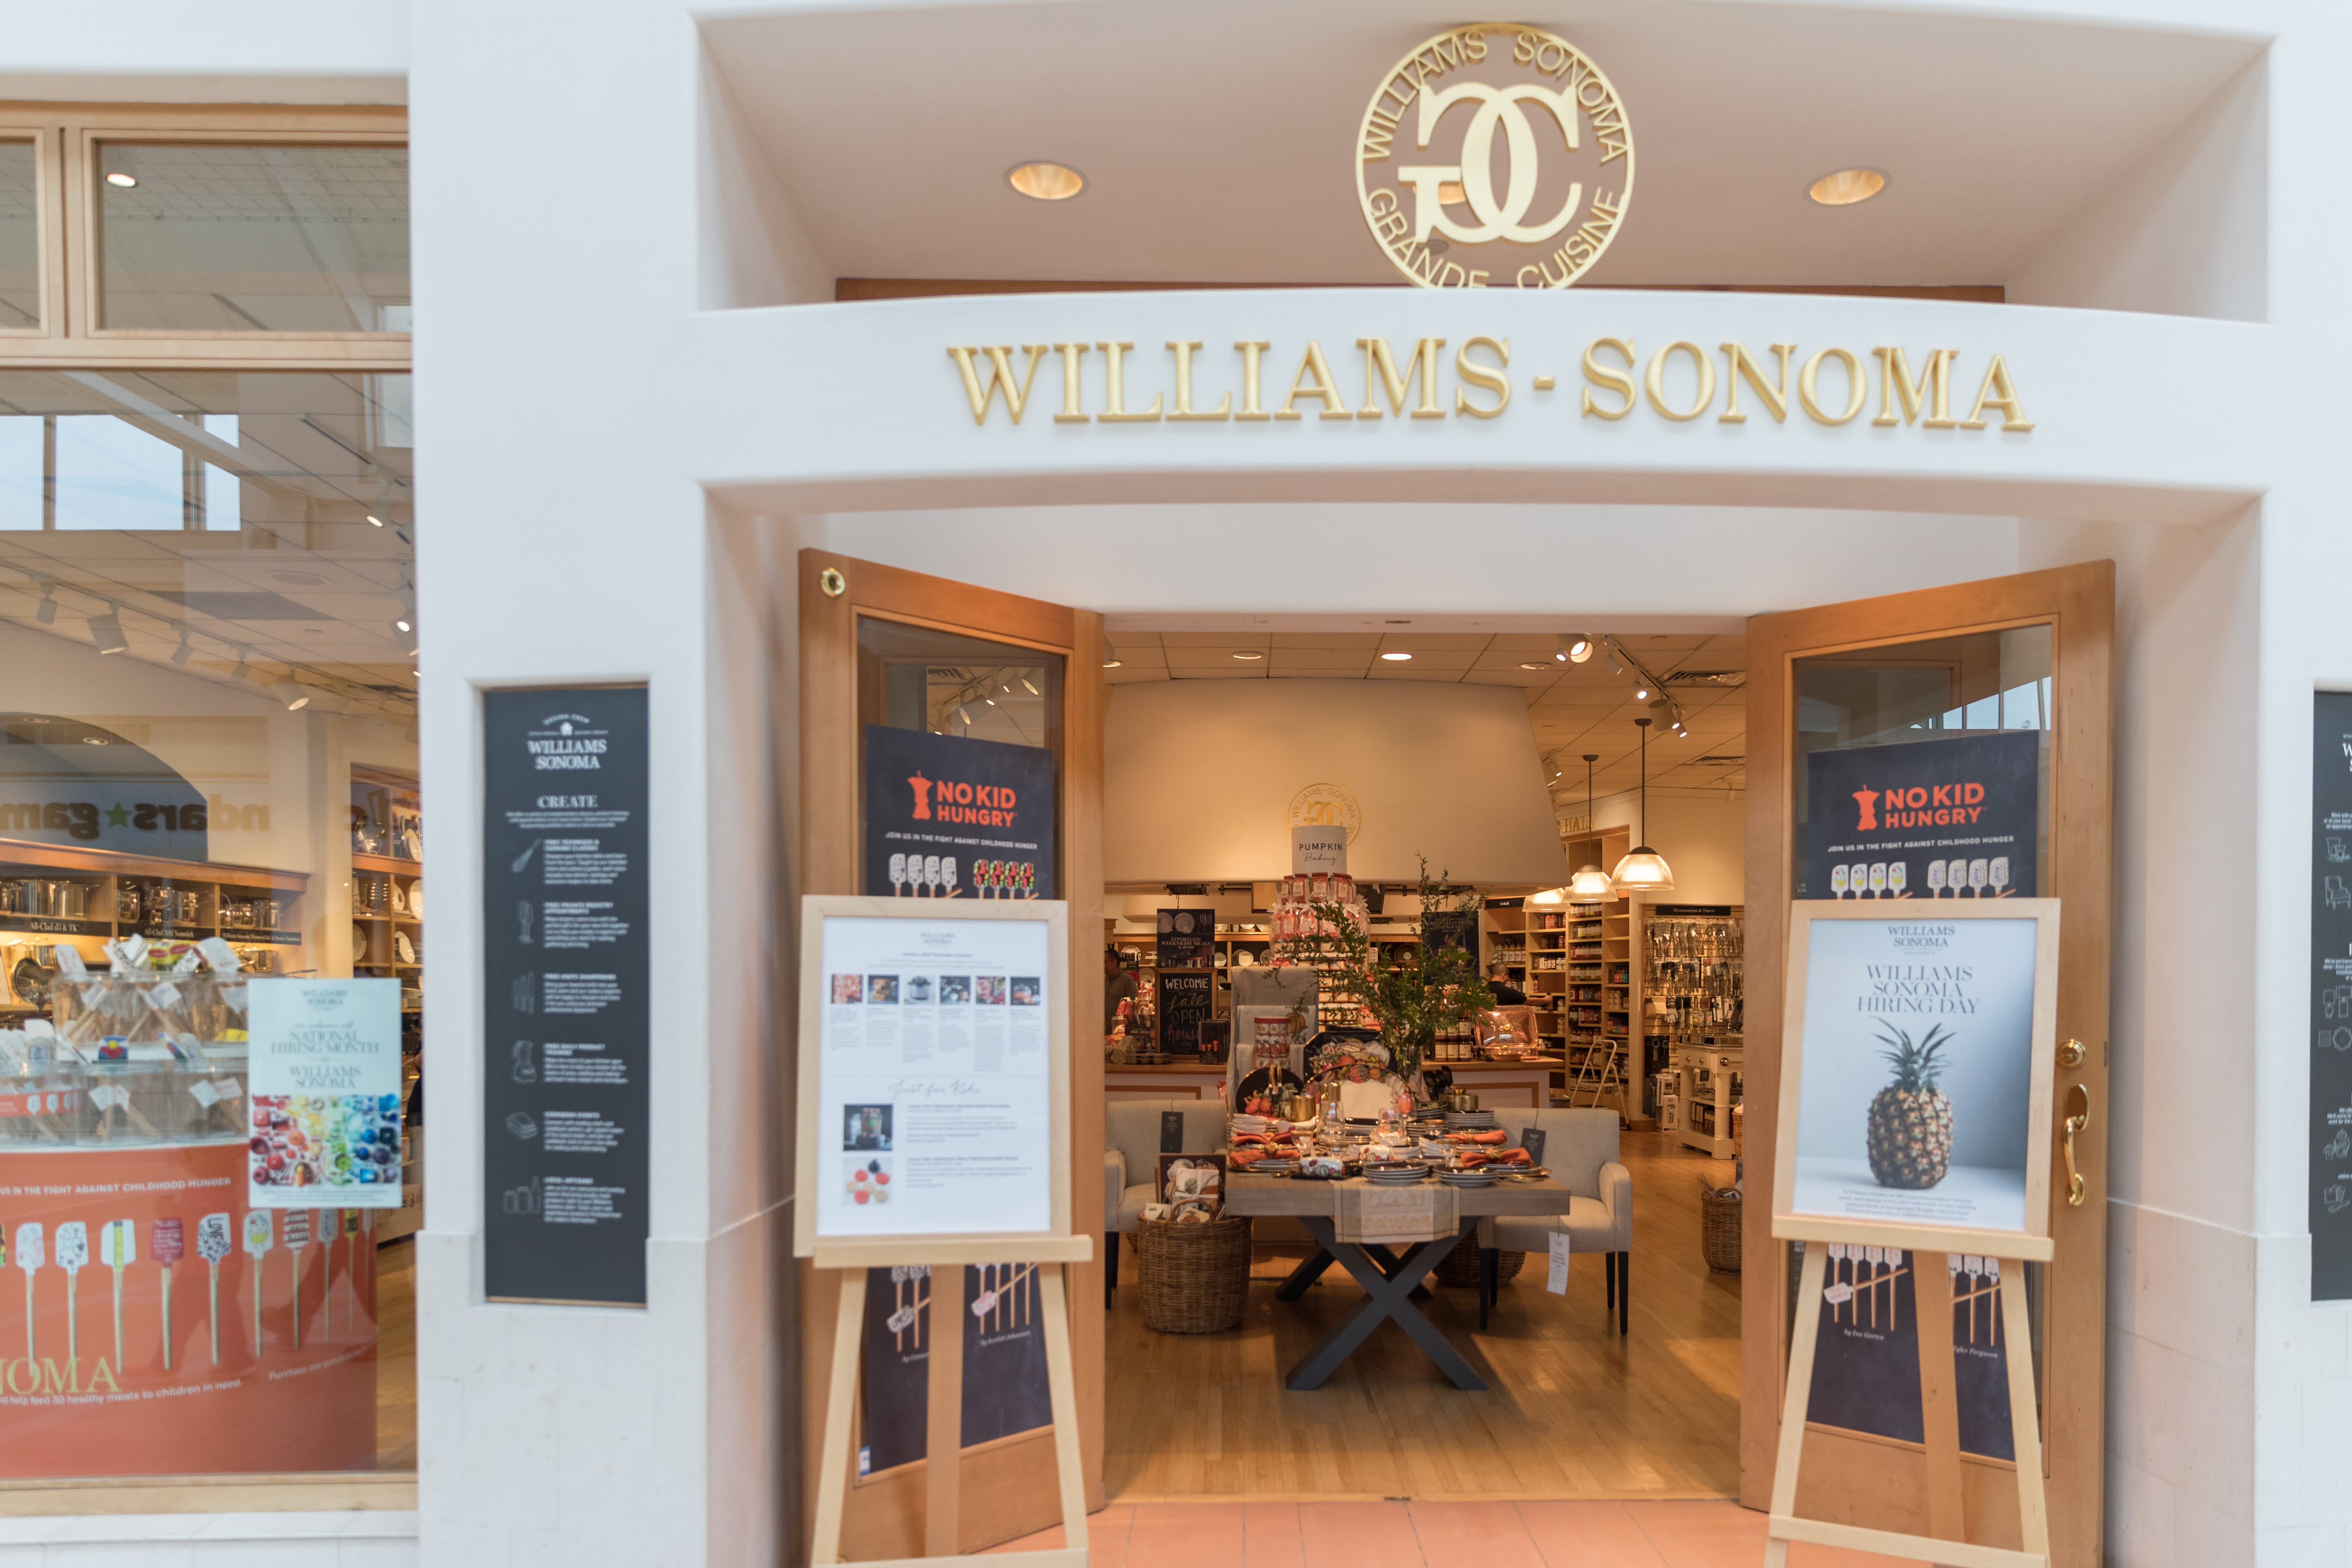 The Best-Selling Products at Williams Sonoma - Spring 2021